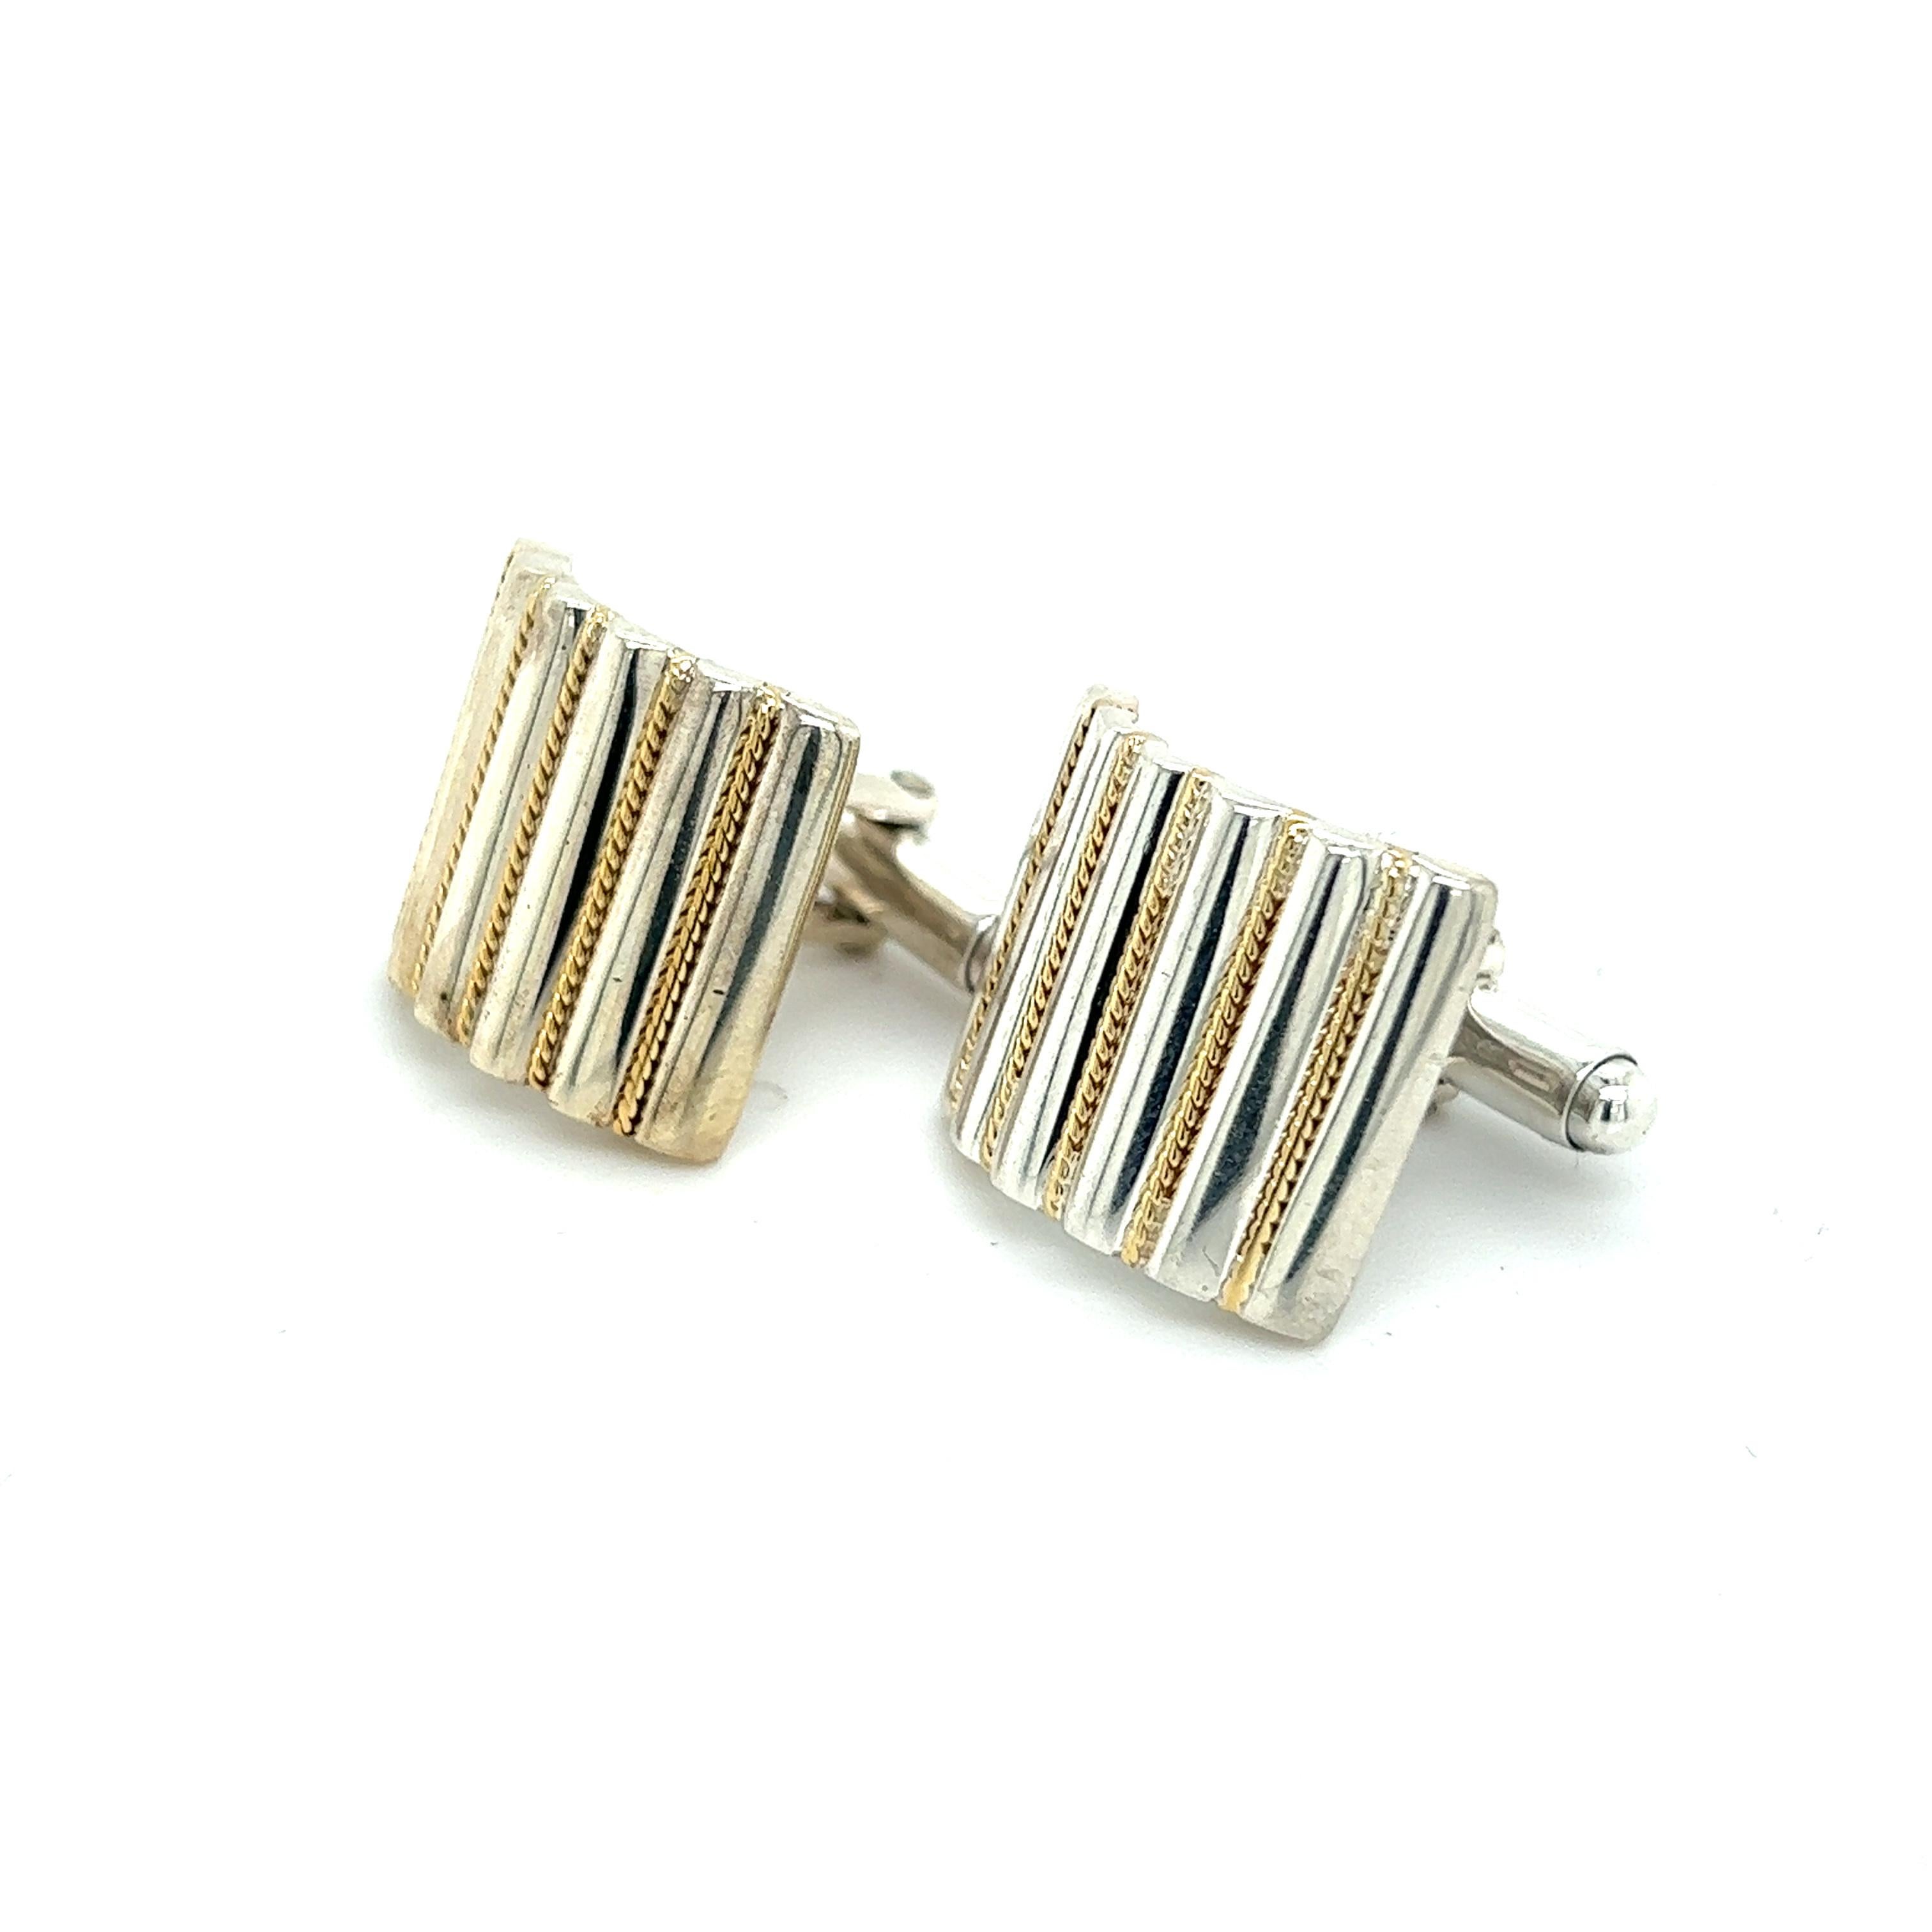 Tiffany & Co Estate Cufflinks 18k Gold + Sterling Silver In Good Condition For Sale In Brooklyn, NY